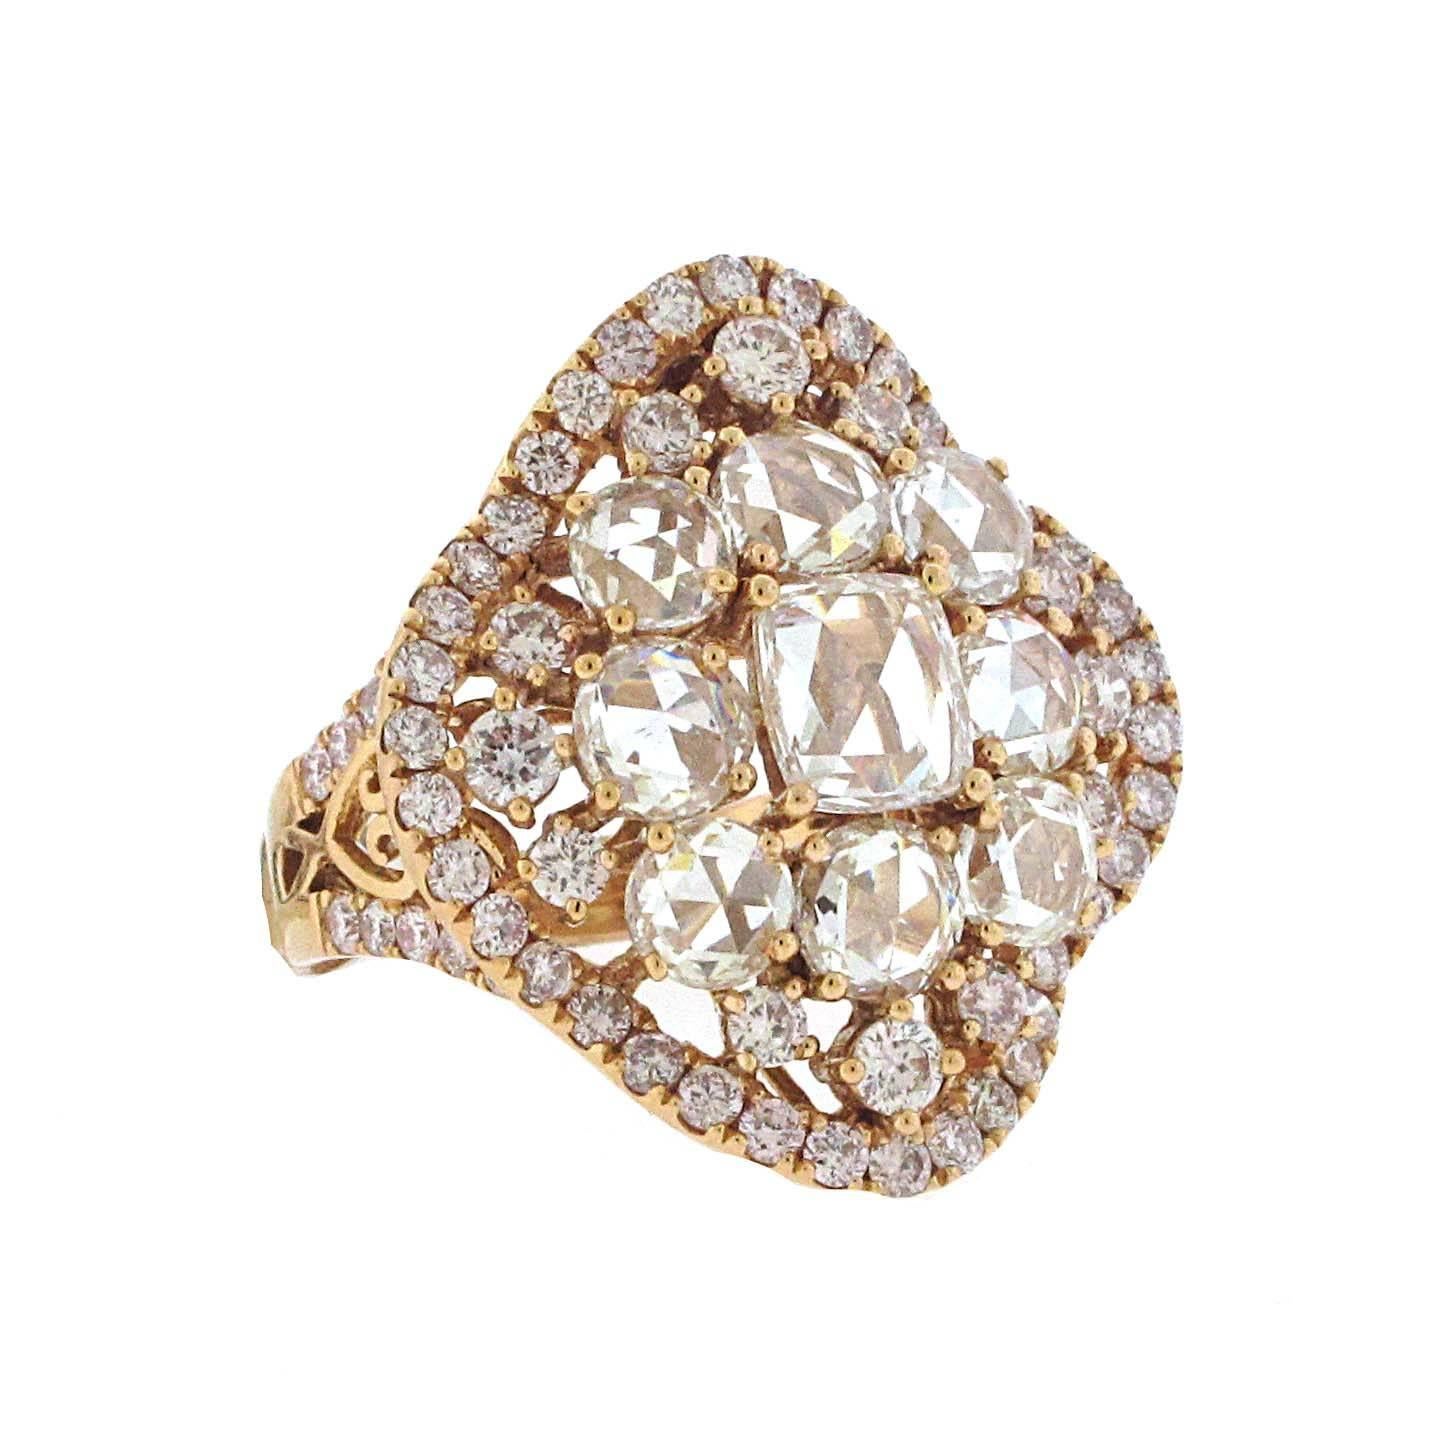 Such a gorgeous ring. Set in 18kt rose gold, this rose cut diamond ring has over 5 carats total weight. Weight is stamped in the bottom of the ring. Large diamonds have a total weight of 3.40 carats and there is 1.64 carats of smaller diamonds.